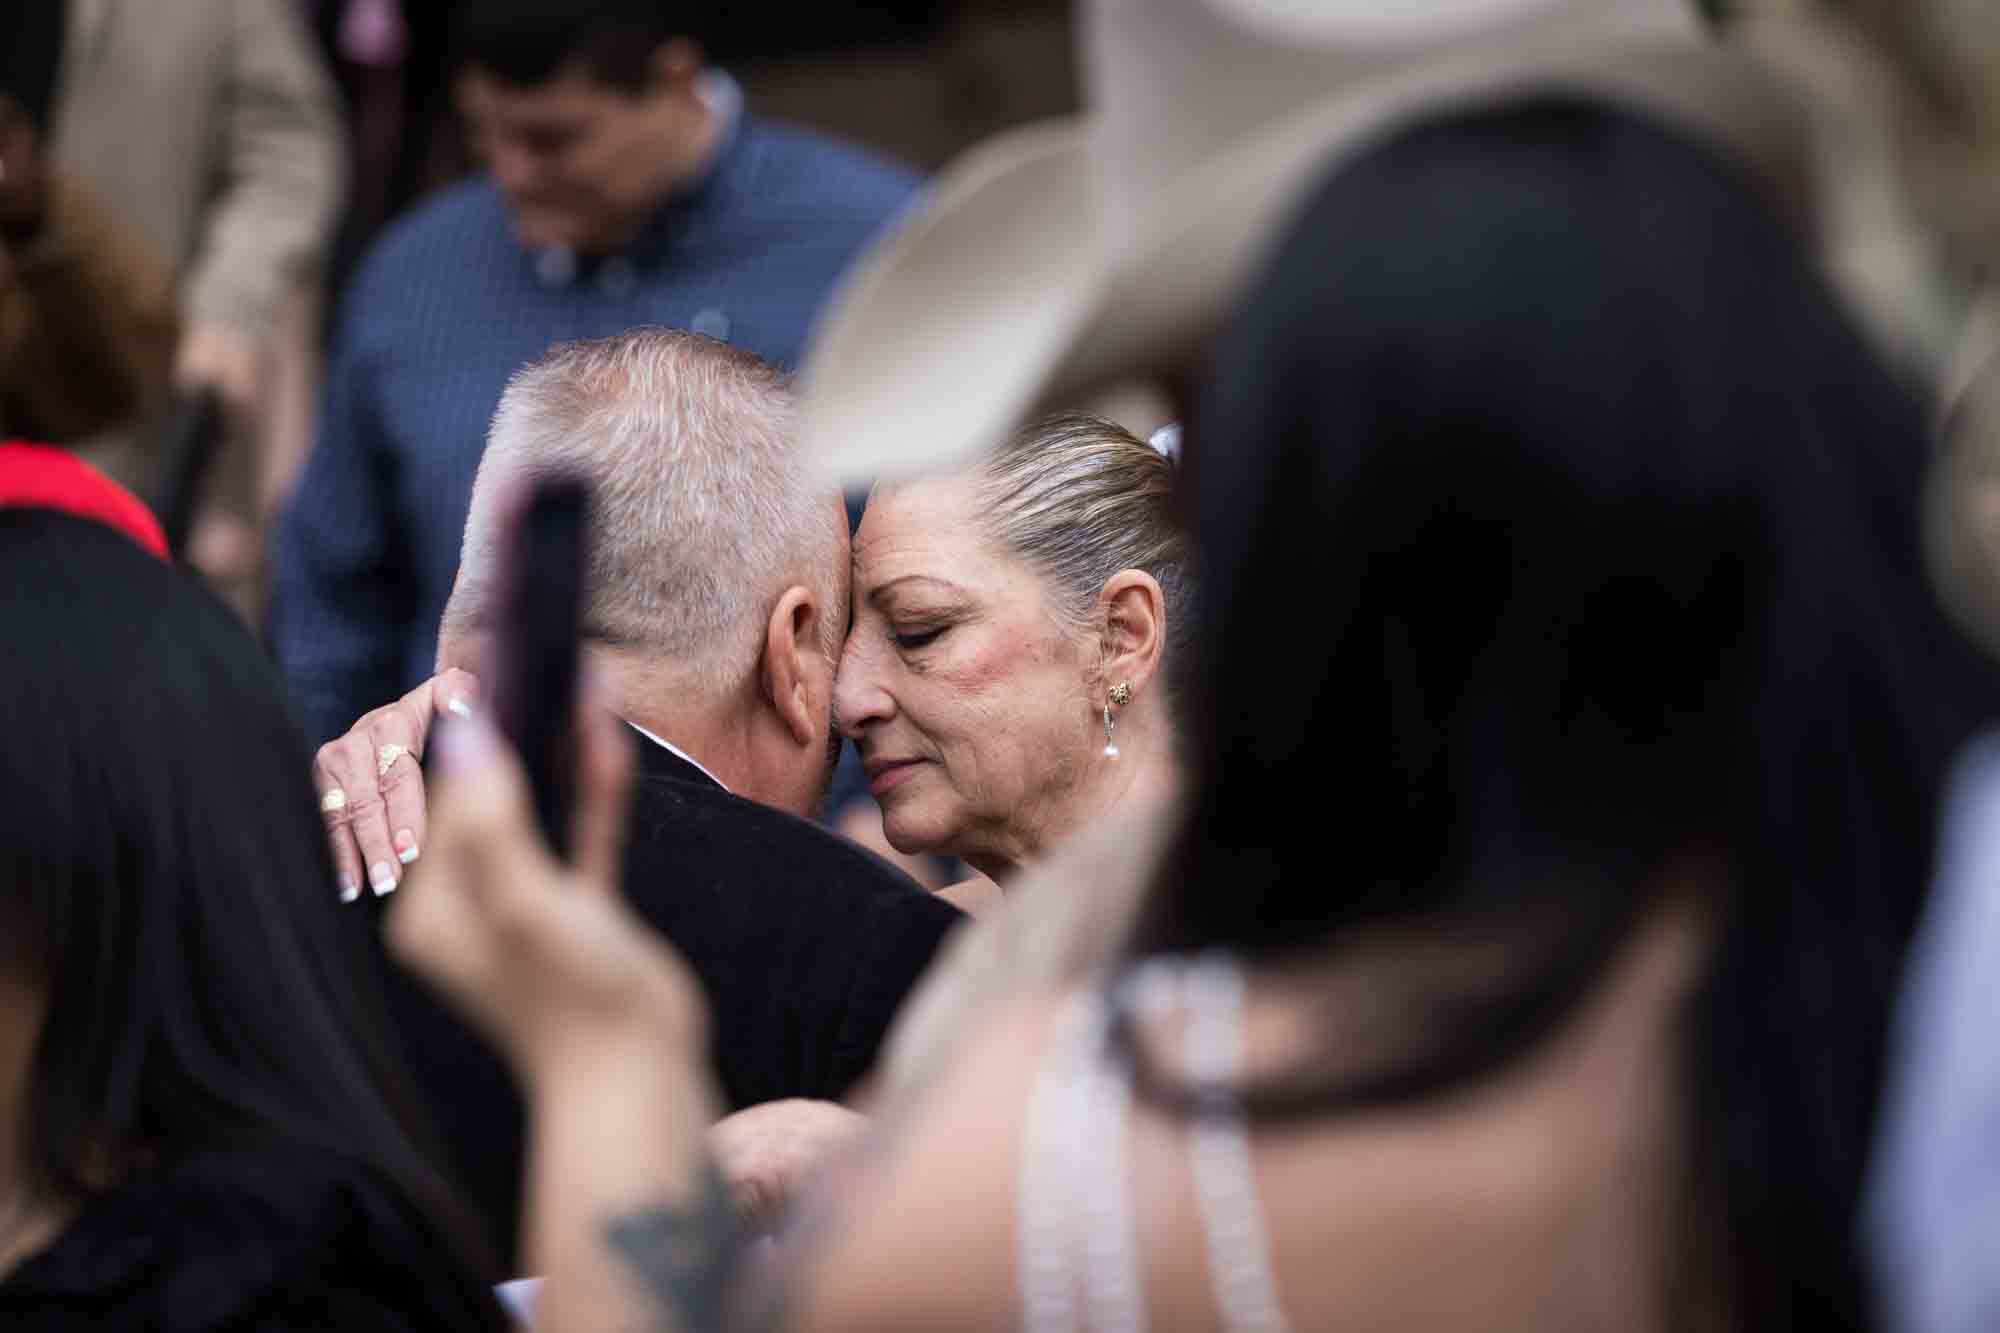 Older couple dancing close in a crowd